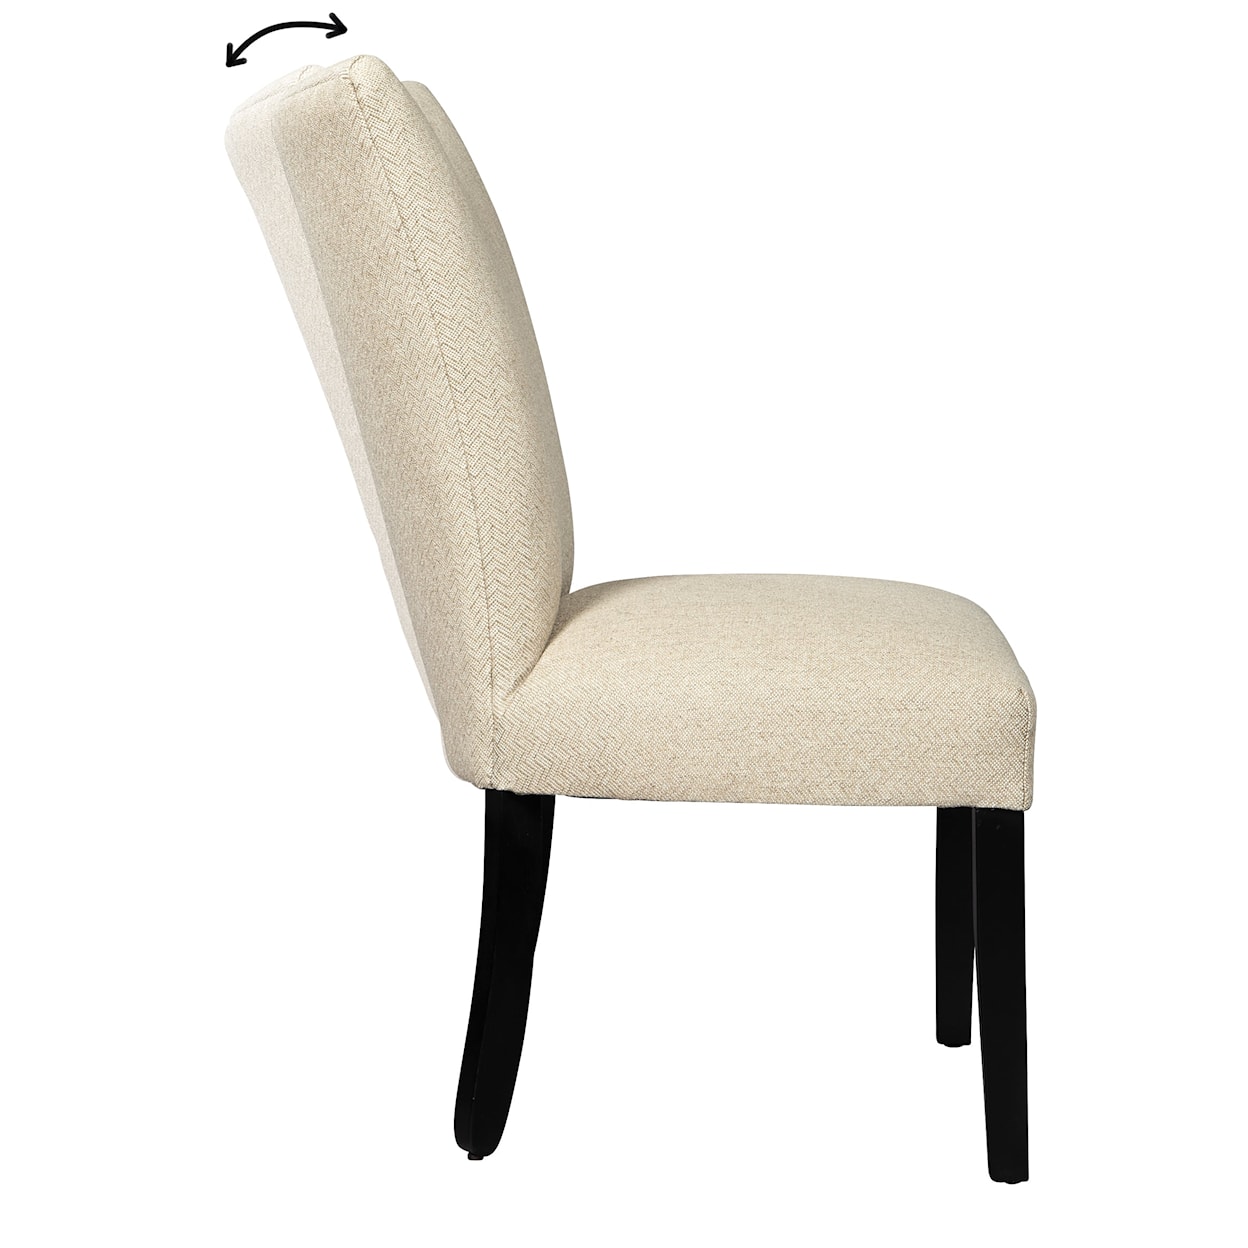 Hekman Upholstery Dining Chair with Flex Back